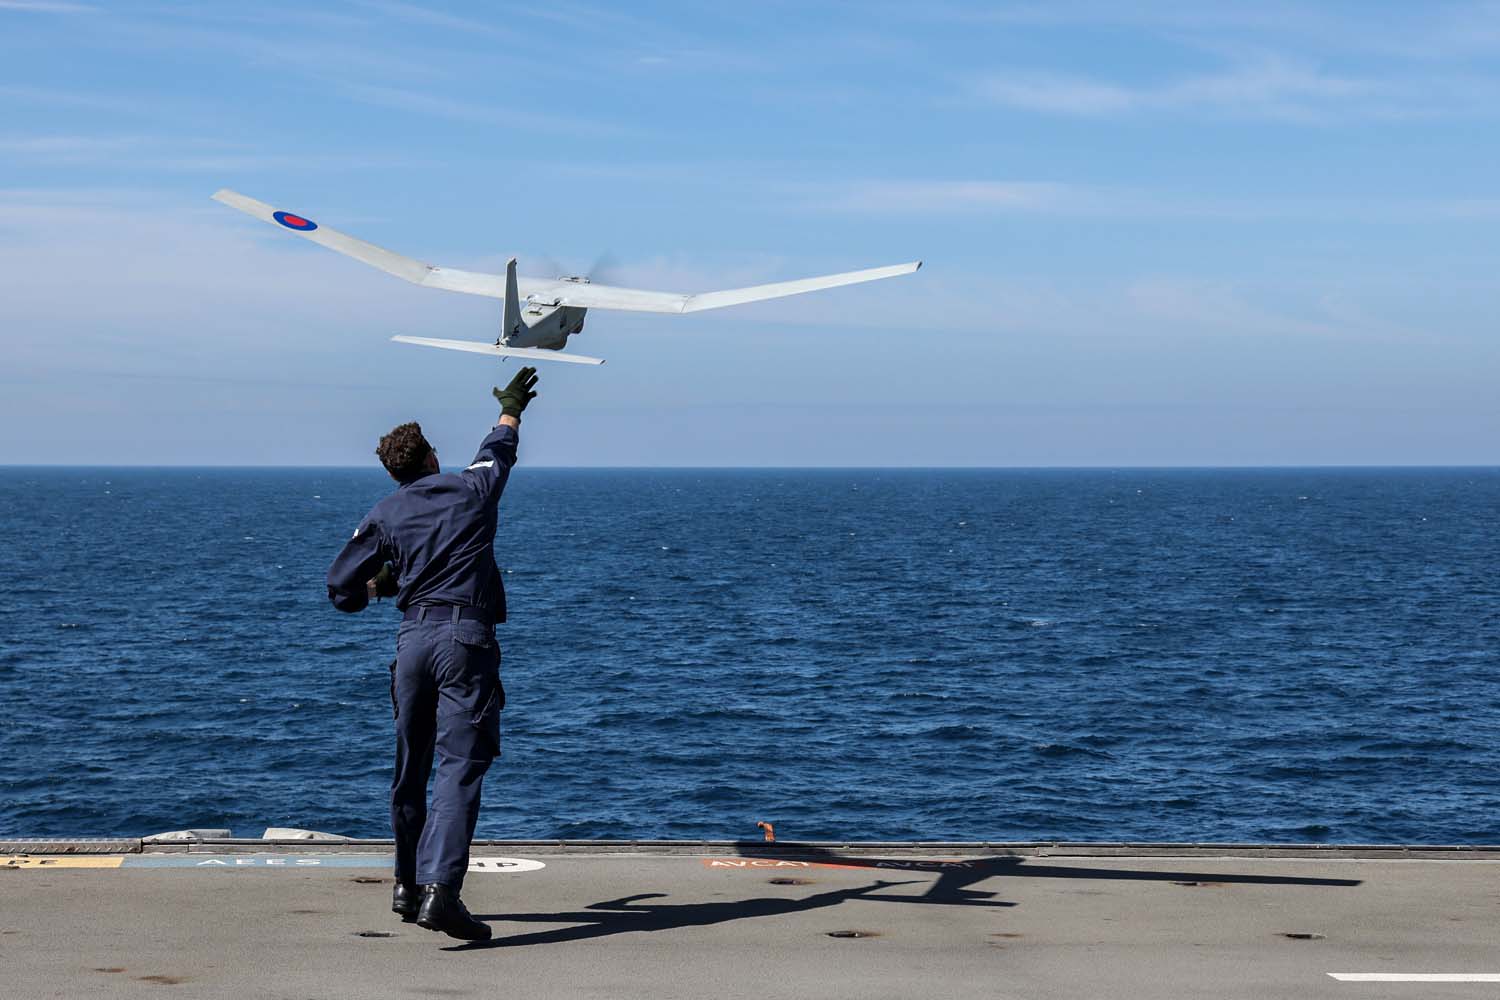 700X Naval Air Squadron deploy the Puma unmanned aircraft from the flightdeck of HMS Albion during opperations in the Baltic sea